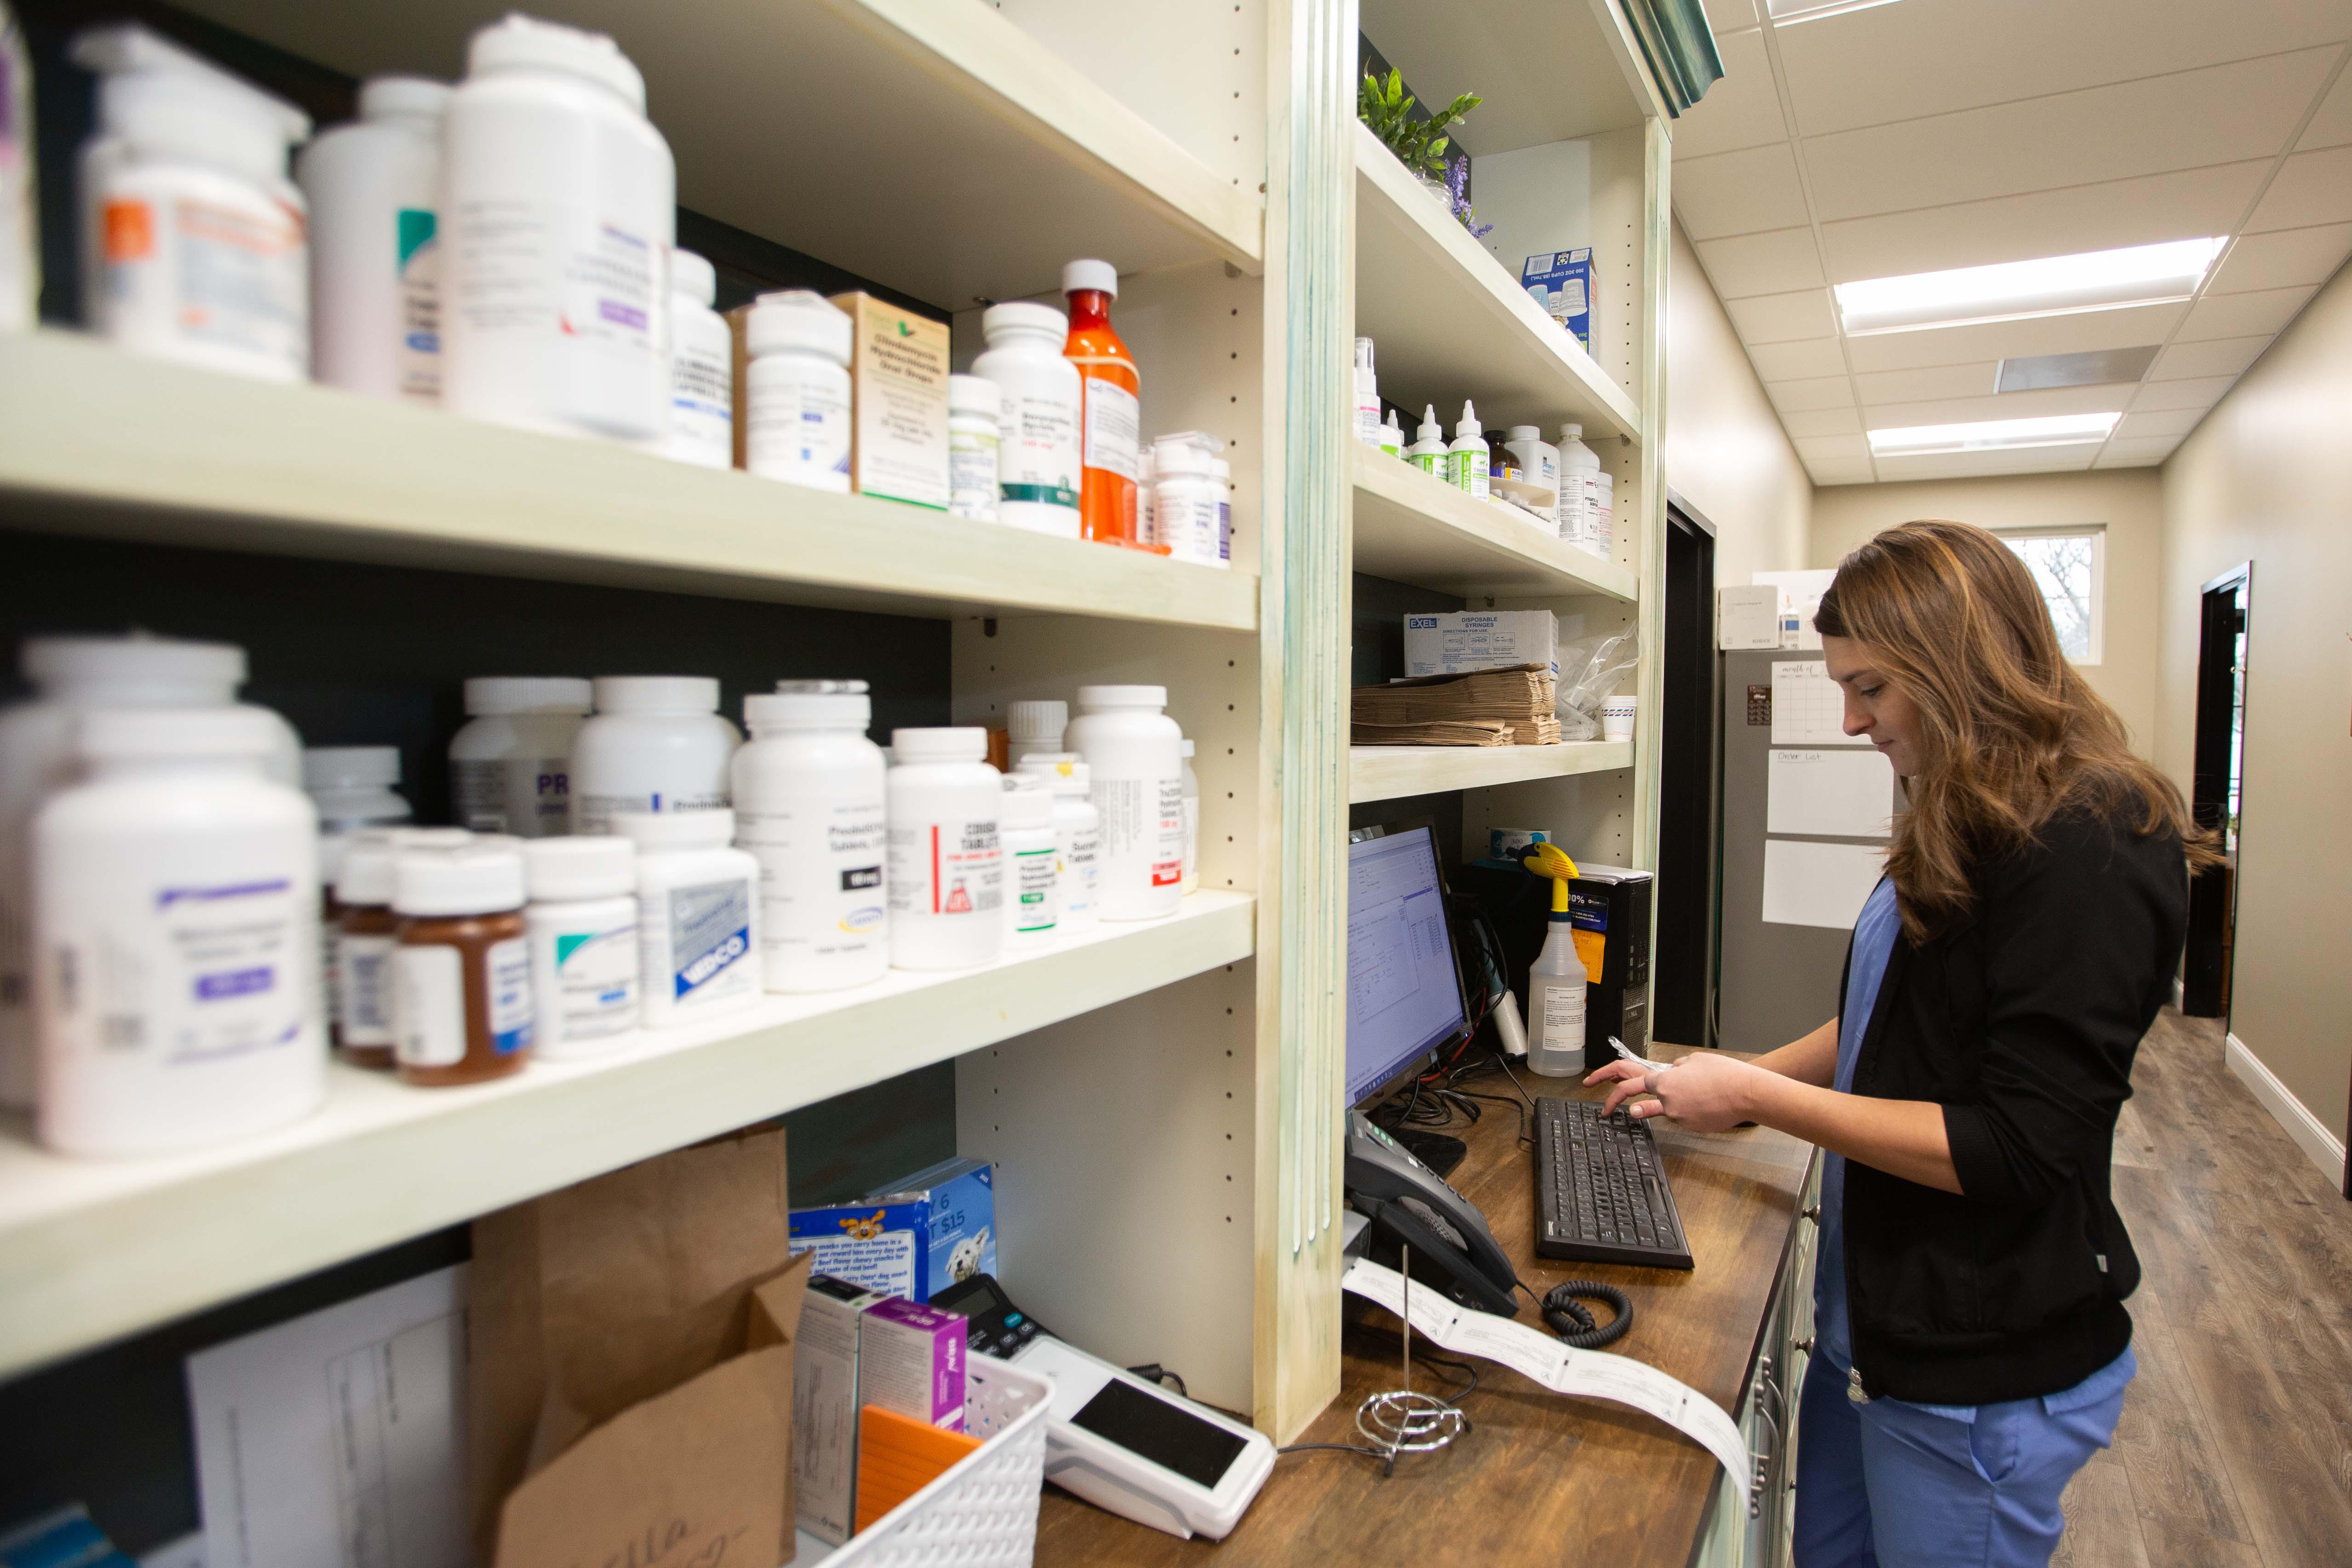 The facility at The Pet Doctor - Cottleville houses an on-site pharmacy to give our clients convenient and direct access to a wide range of medications their pets may need.